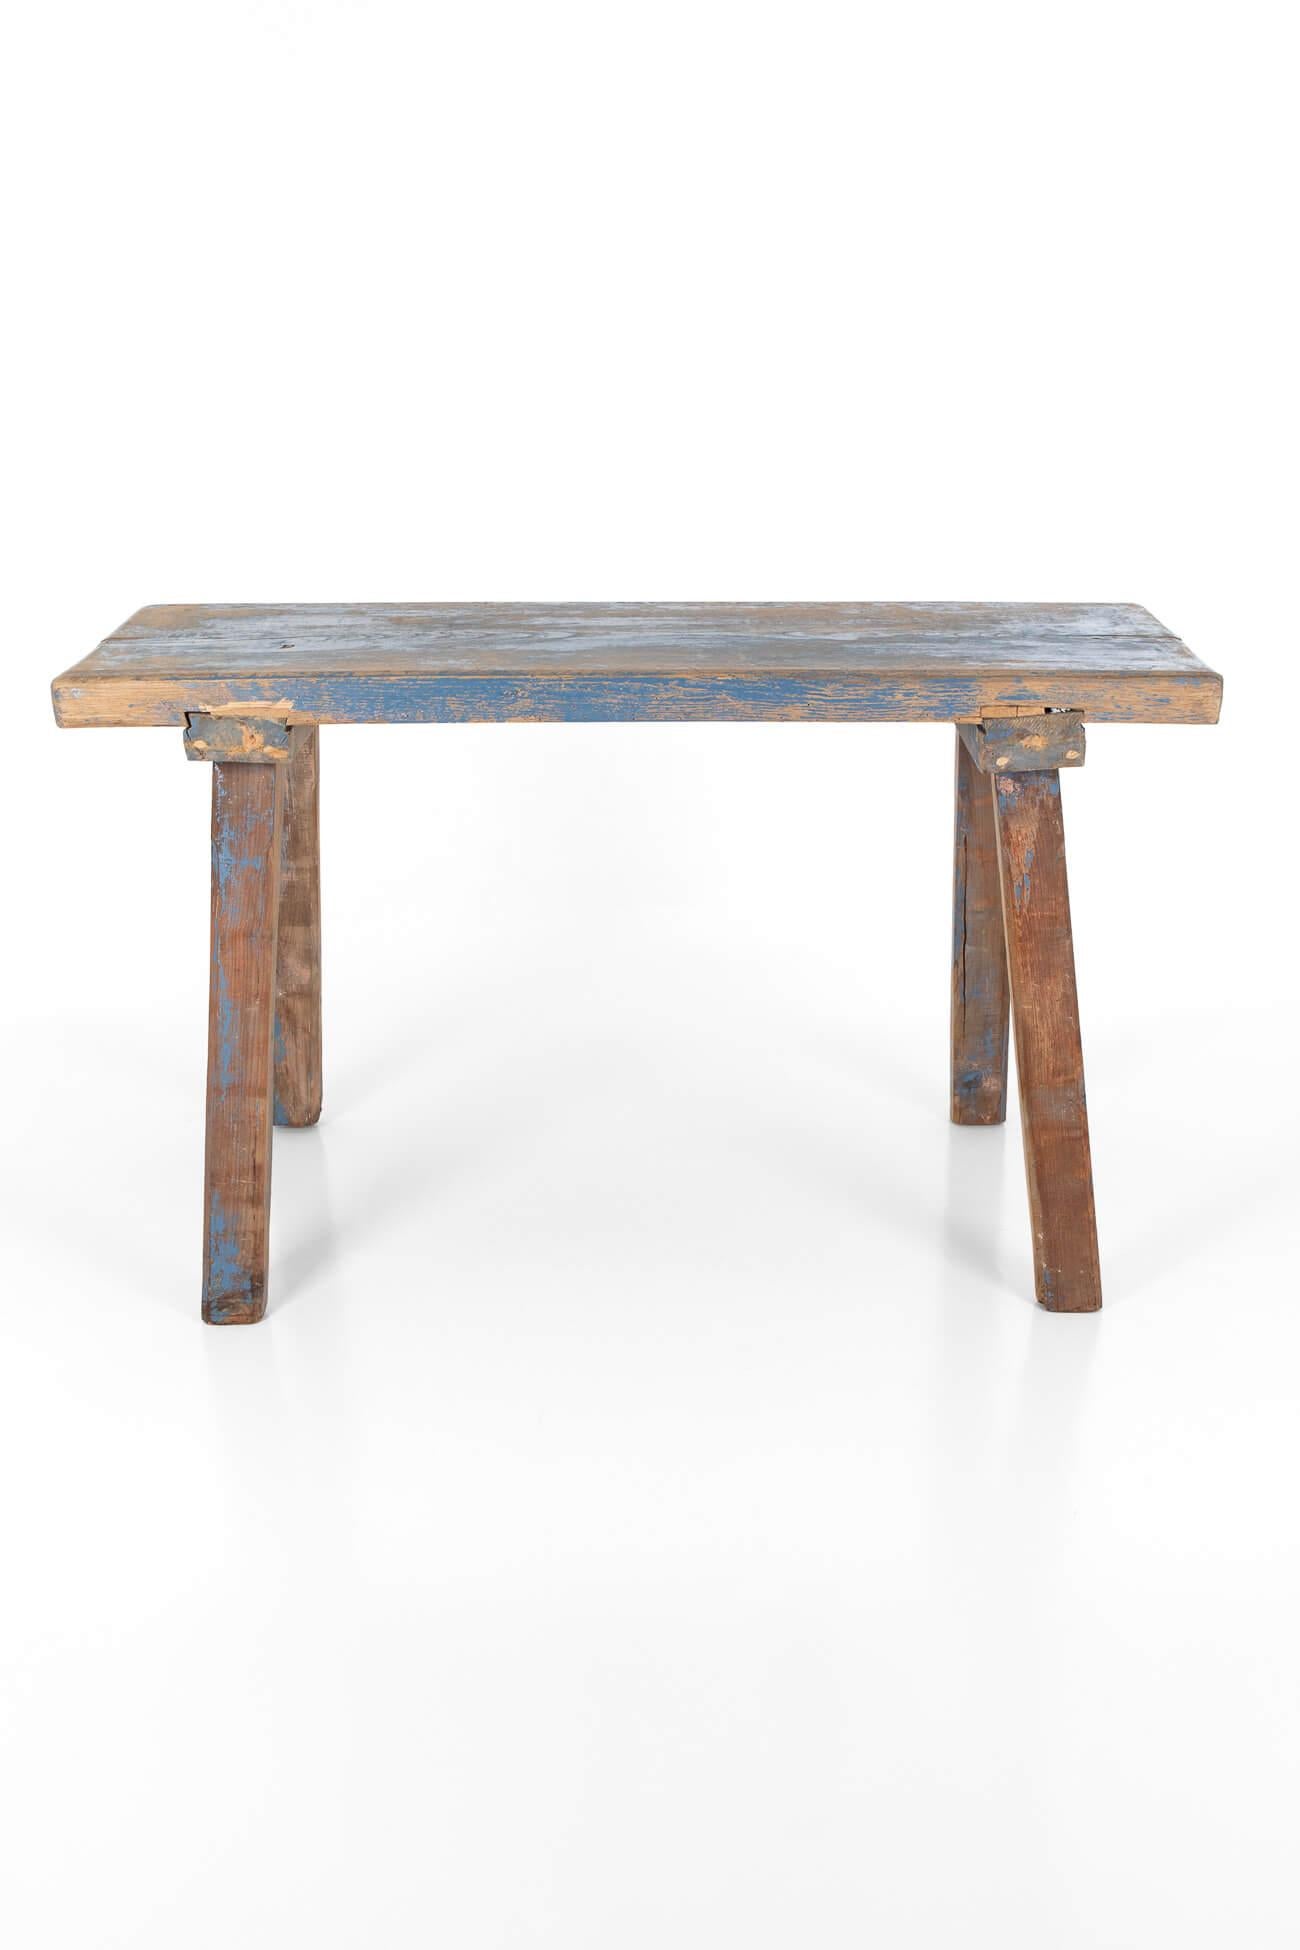 A proud rustic workshop table with a solid oak top raised on four sturdy pine block legs.

Traces of original blue paint to the top and legs with naive zinc supports to each end.

The table would make a wonderful hall console table or kitchen